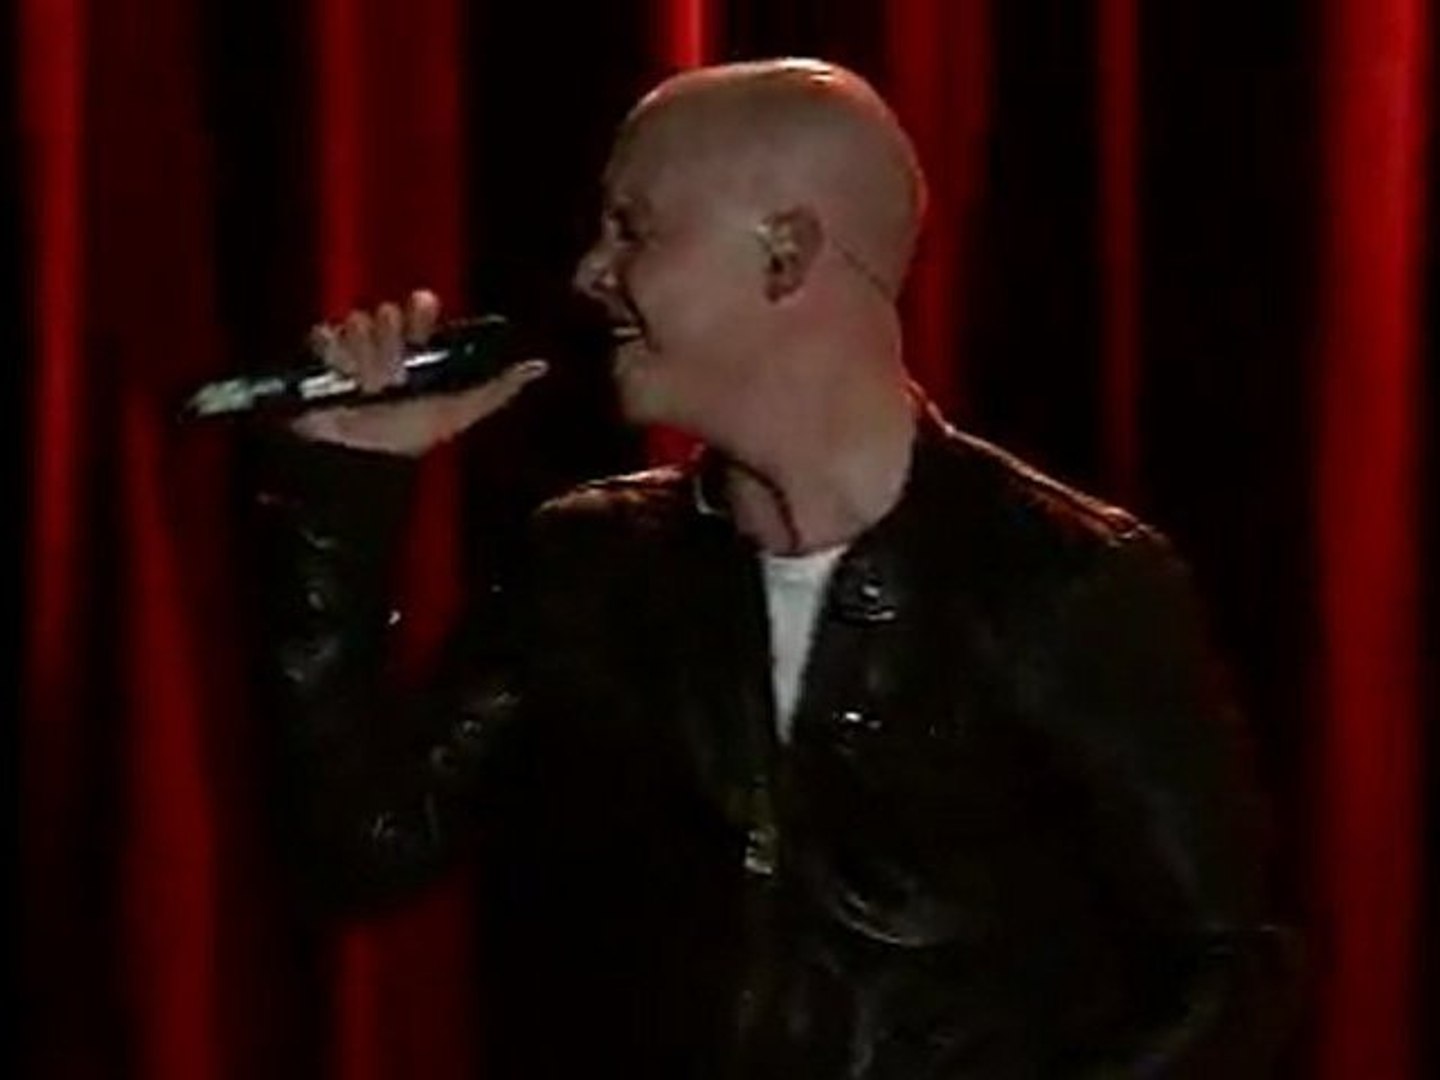 Live Music Series - The Fray Exclusive Concert Video | Jim Beam Videos